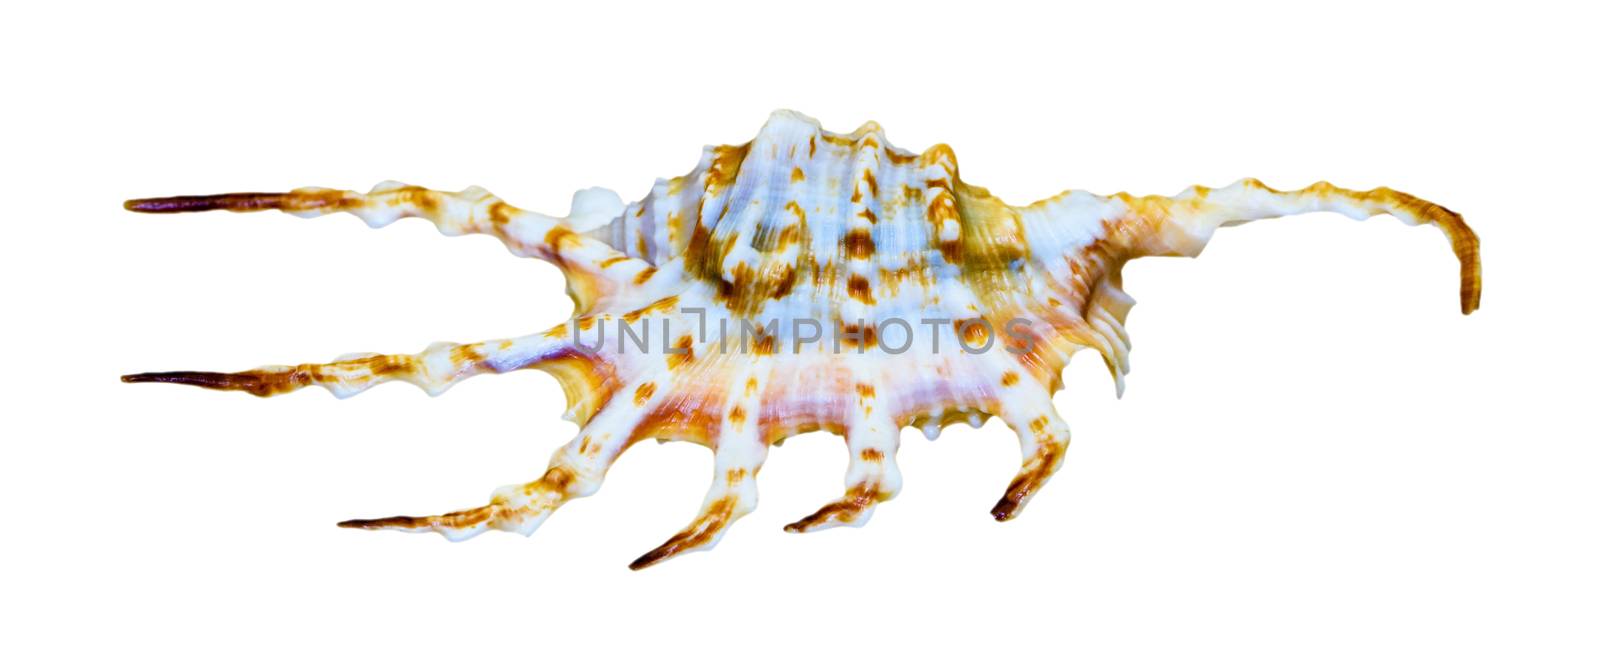 Shell of Lambis Scorpius or Scorpion Spider Conch is a species of sea snail, marine gastropod mollusk in the family Strombidae isolated on white background with clipping paths